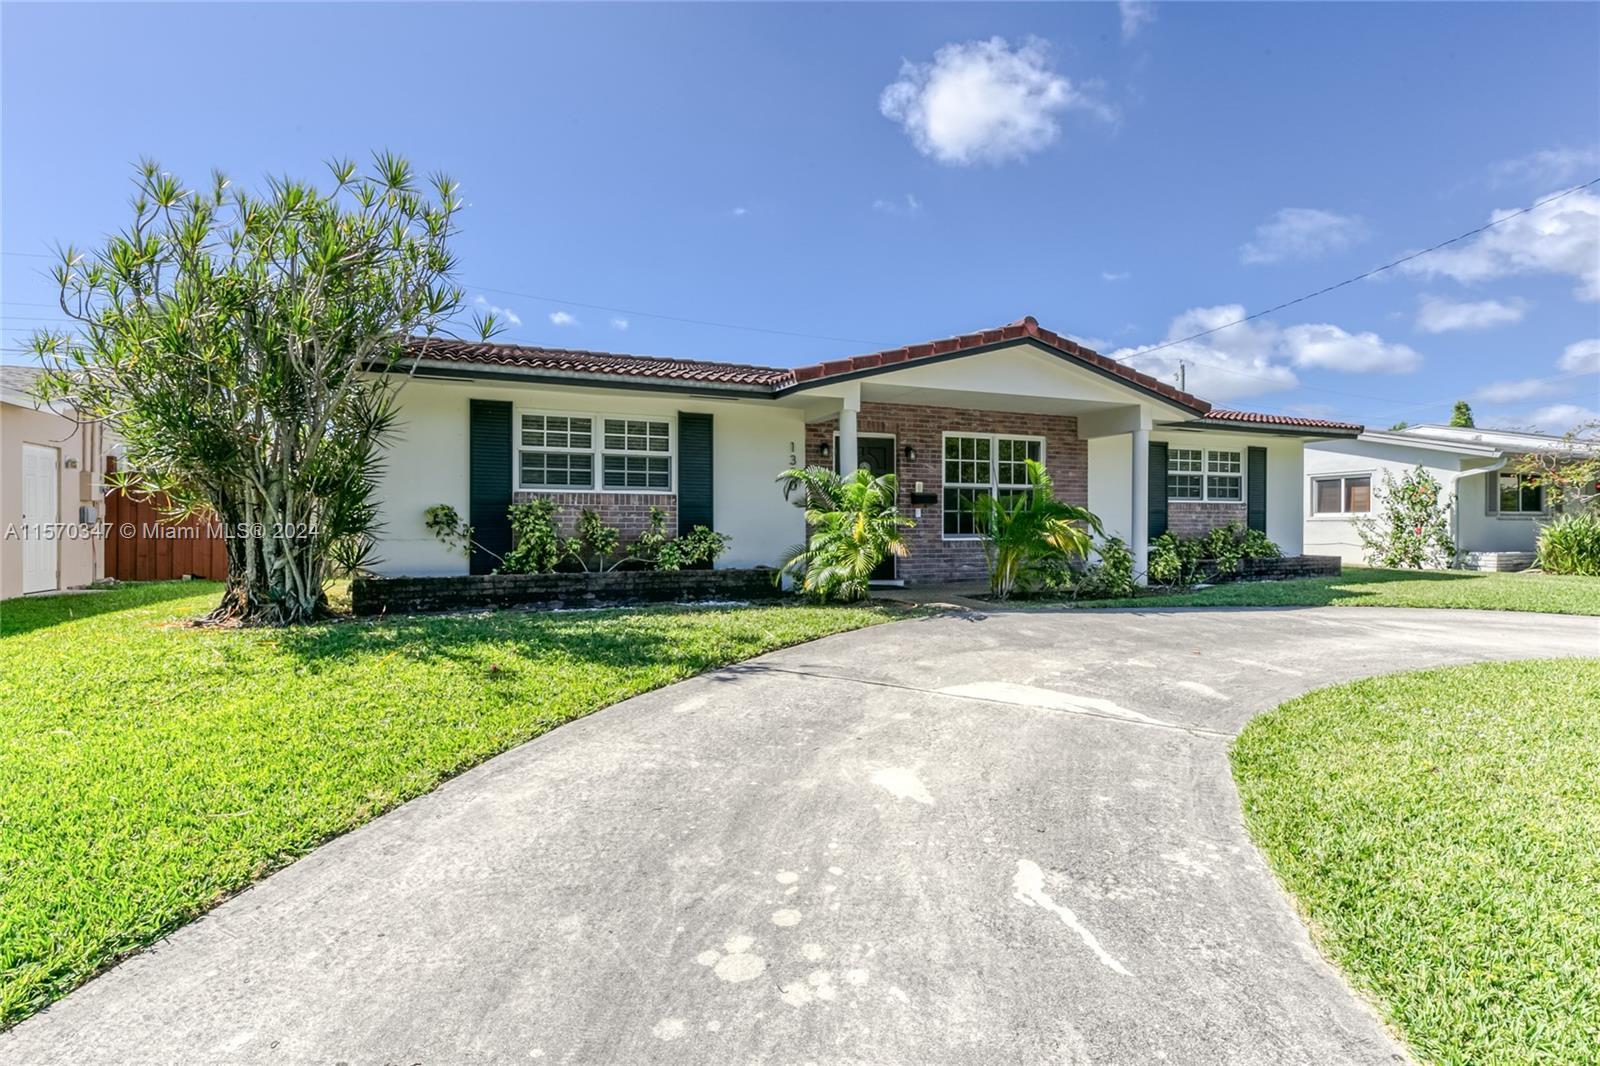 Beautiful paradise for the whole family in South Florida. Fully renovated very spacious 4 bedrooms 3